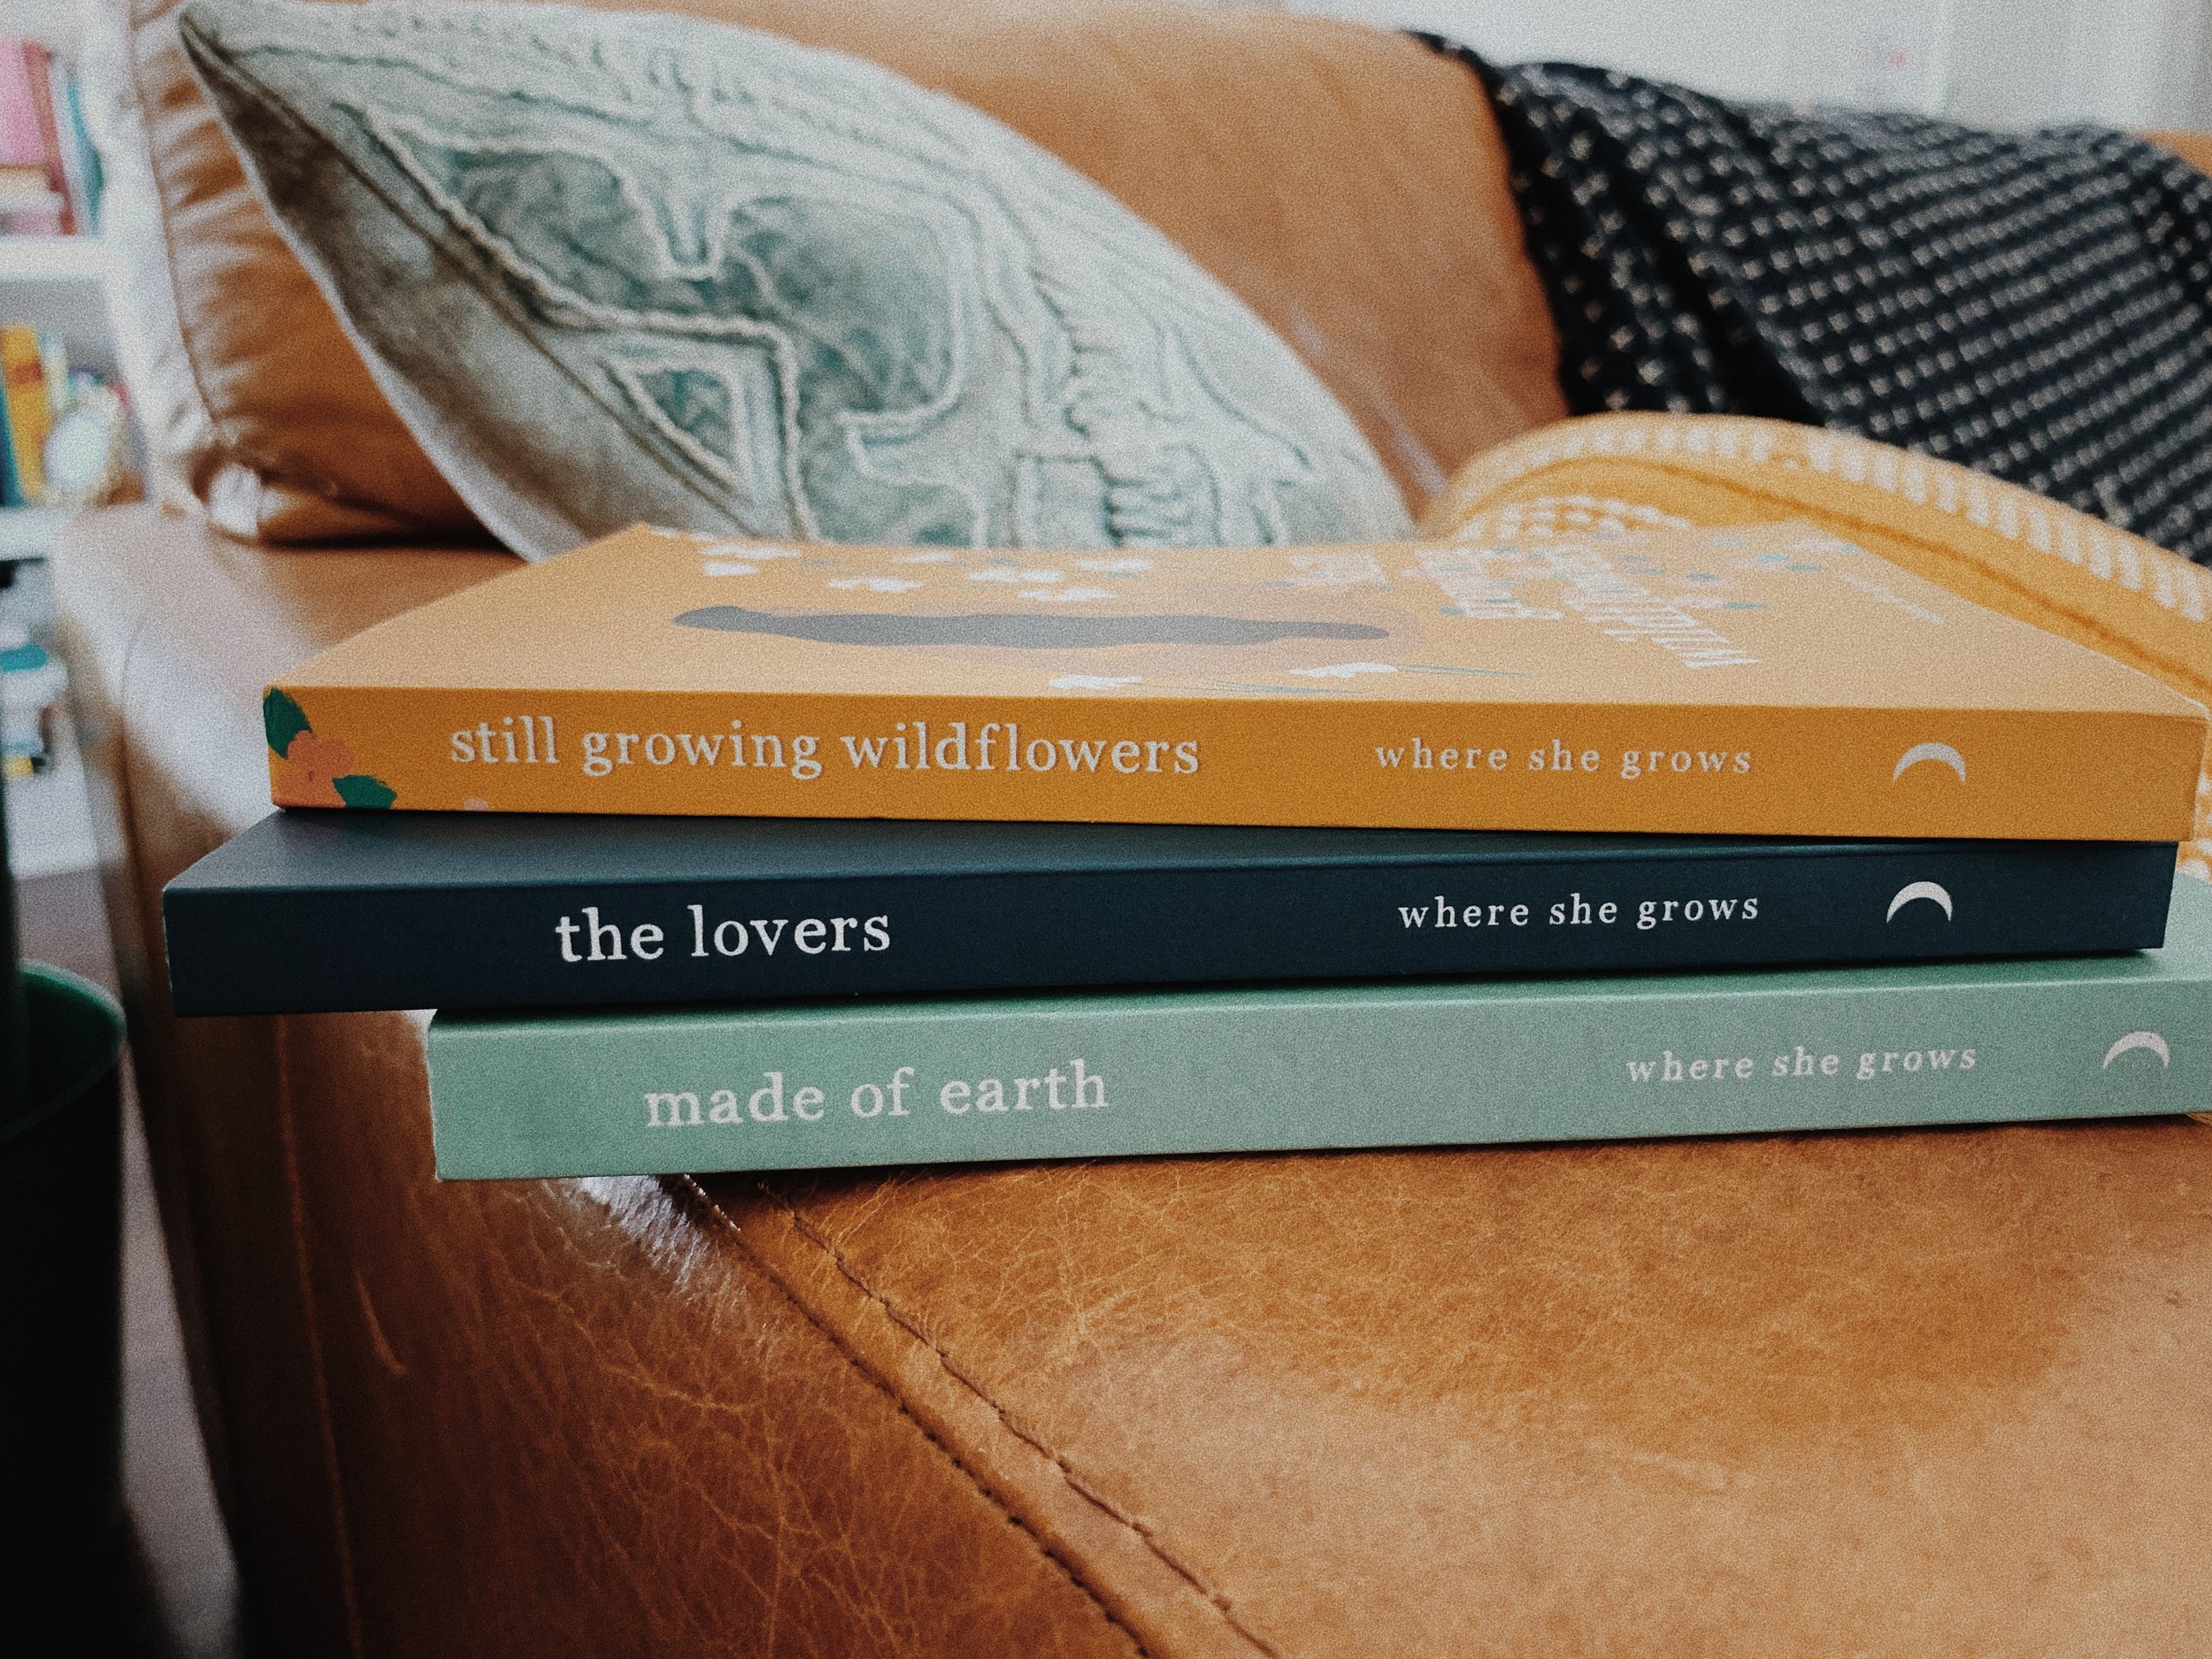 writing a poetry book: three colorful poetry books stacked on the arm of a couch